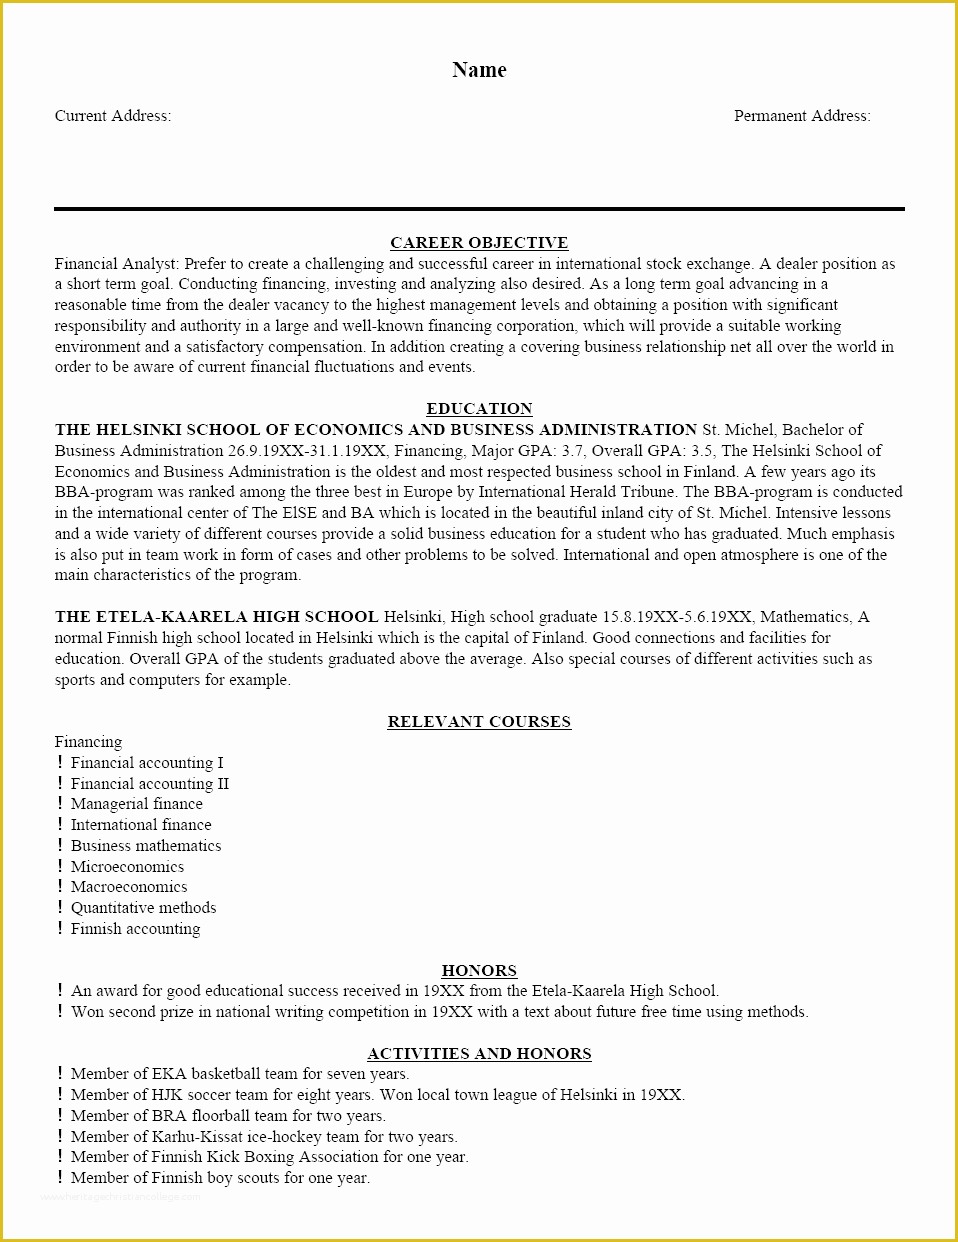 Free Resume Cover Letter Template Of Free Sample Resume Template Cover Letter and Resume